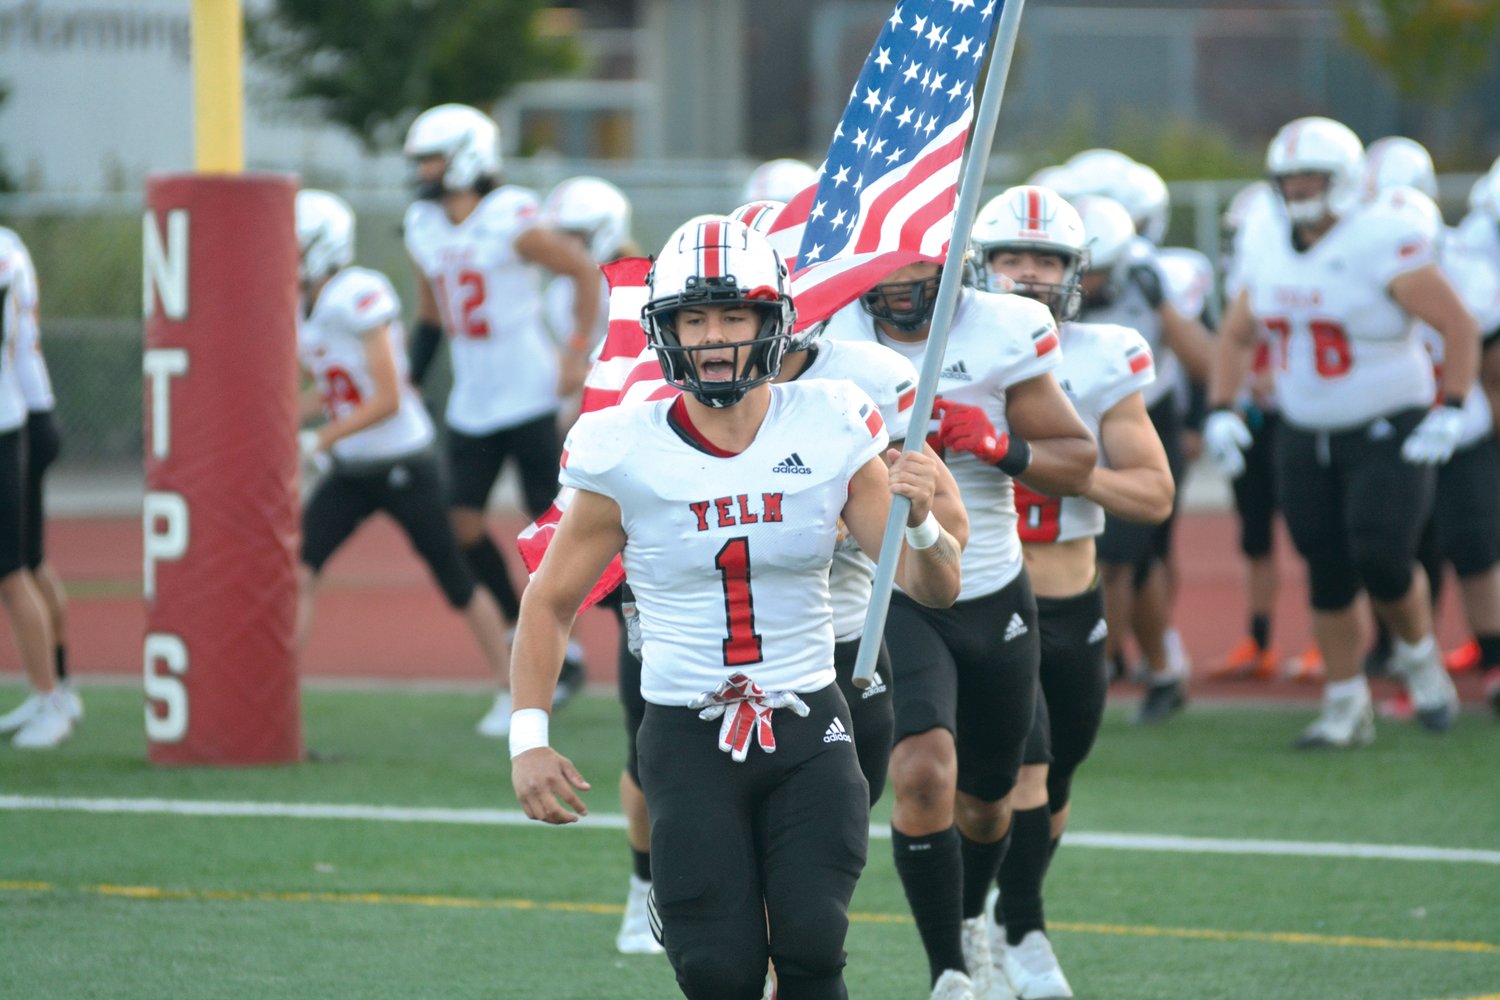 Senior linebacker and captain Ray Wright holds the American flag as the Tornados enter the field against River Ridge.